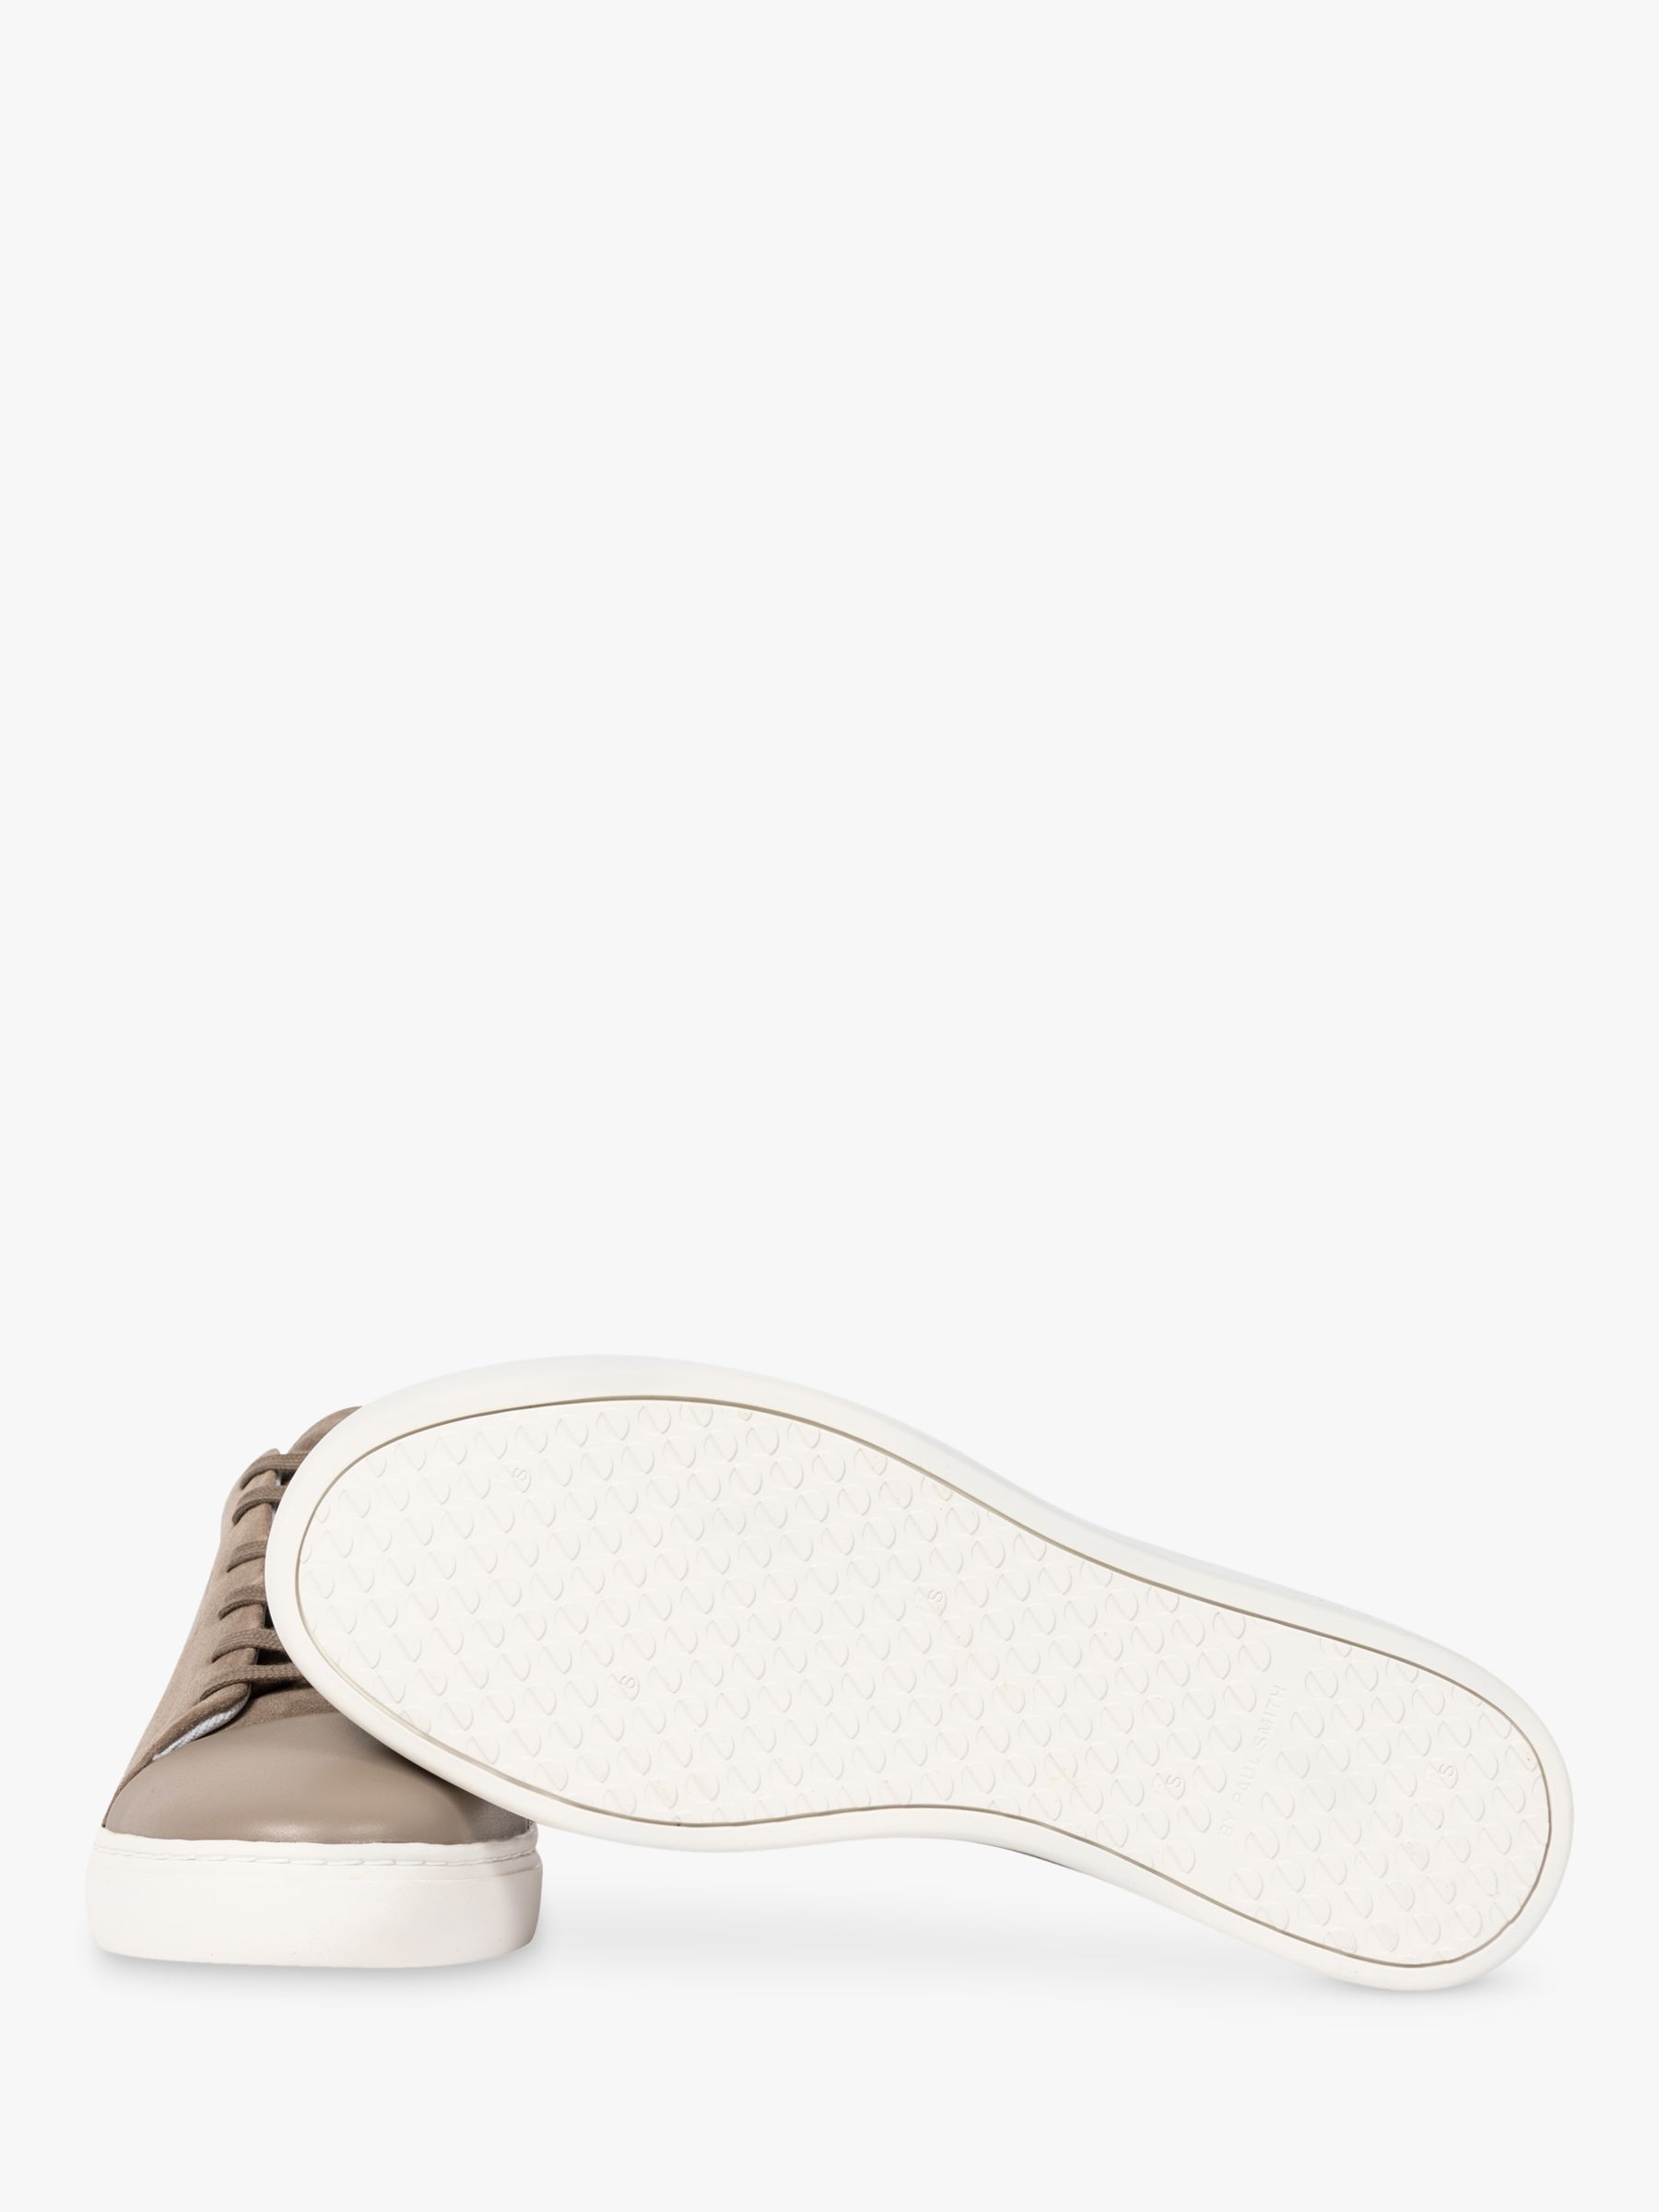 Buy Paul Smith Lee Suede Trainers Online at johnlewis.com